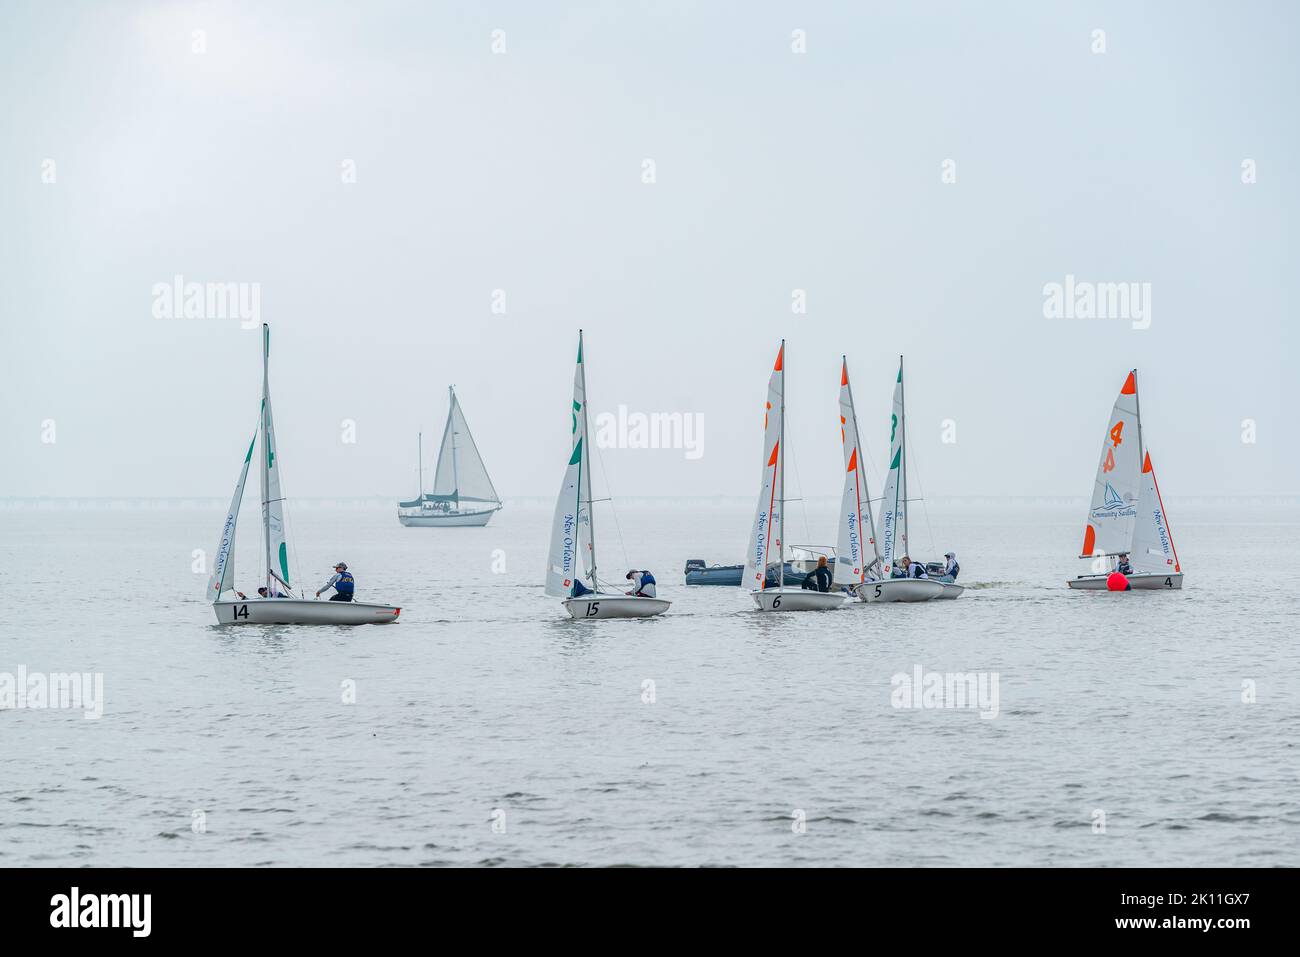 NEW ORLEANS, LA, USA - FEBRUARY 16, 2019: Small sailboat competition on Lake Pontchartrain with larger sailboat and fog in the background Stock Photo